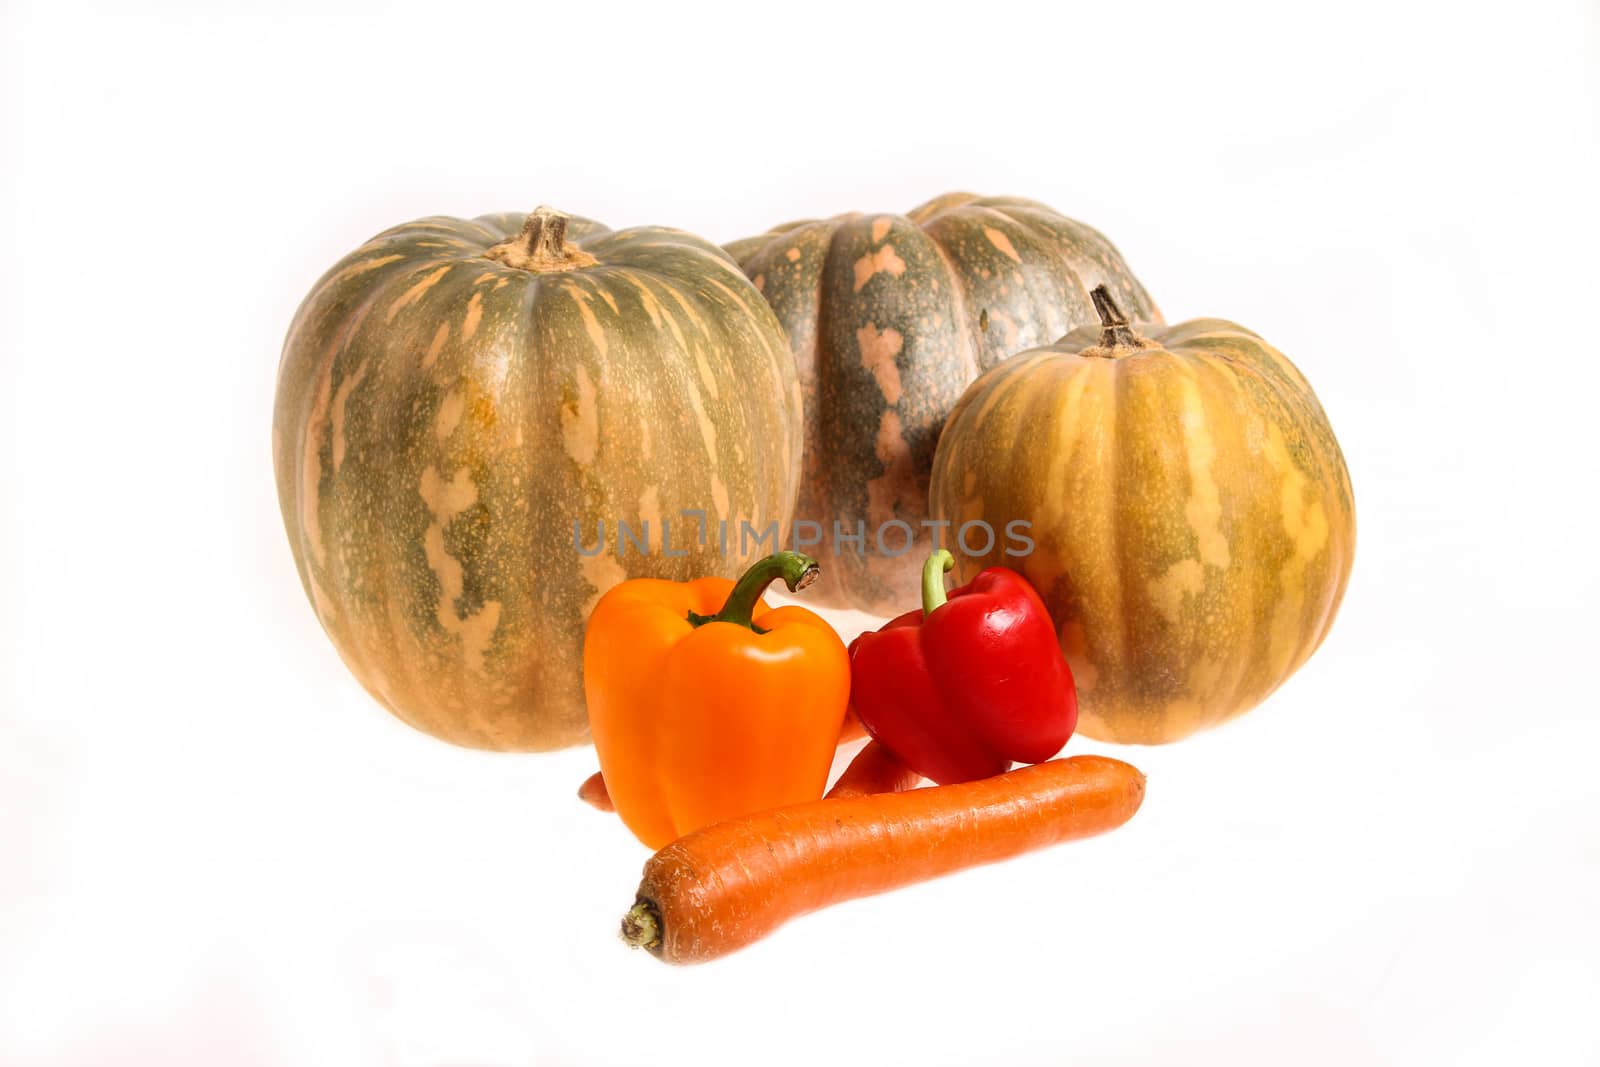 Pumpkins and other vegetables on a white background, isolated
